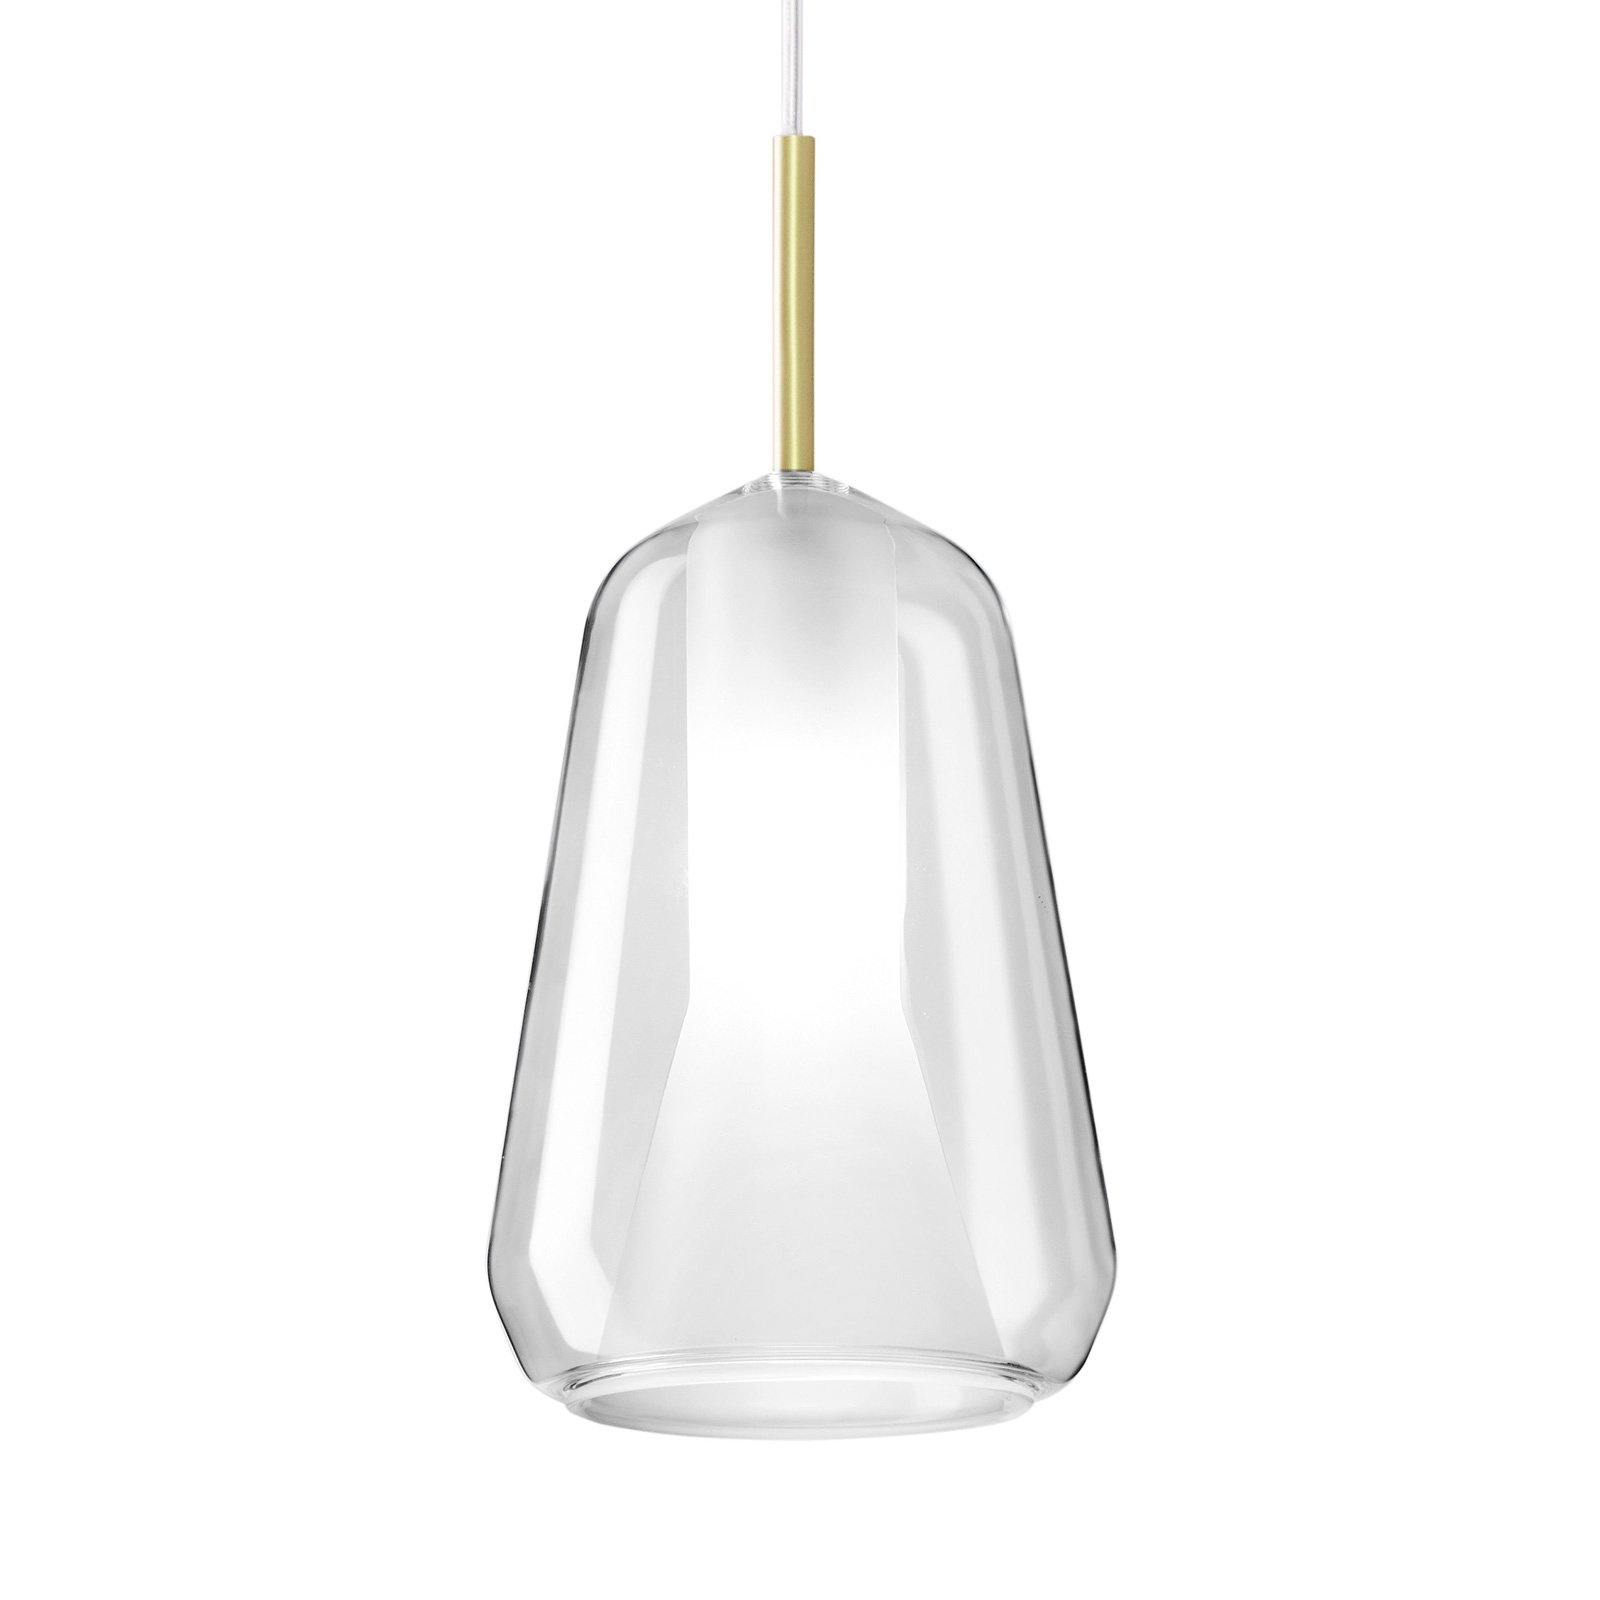 X-Ray hanging light, narrow cone shape clear